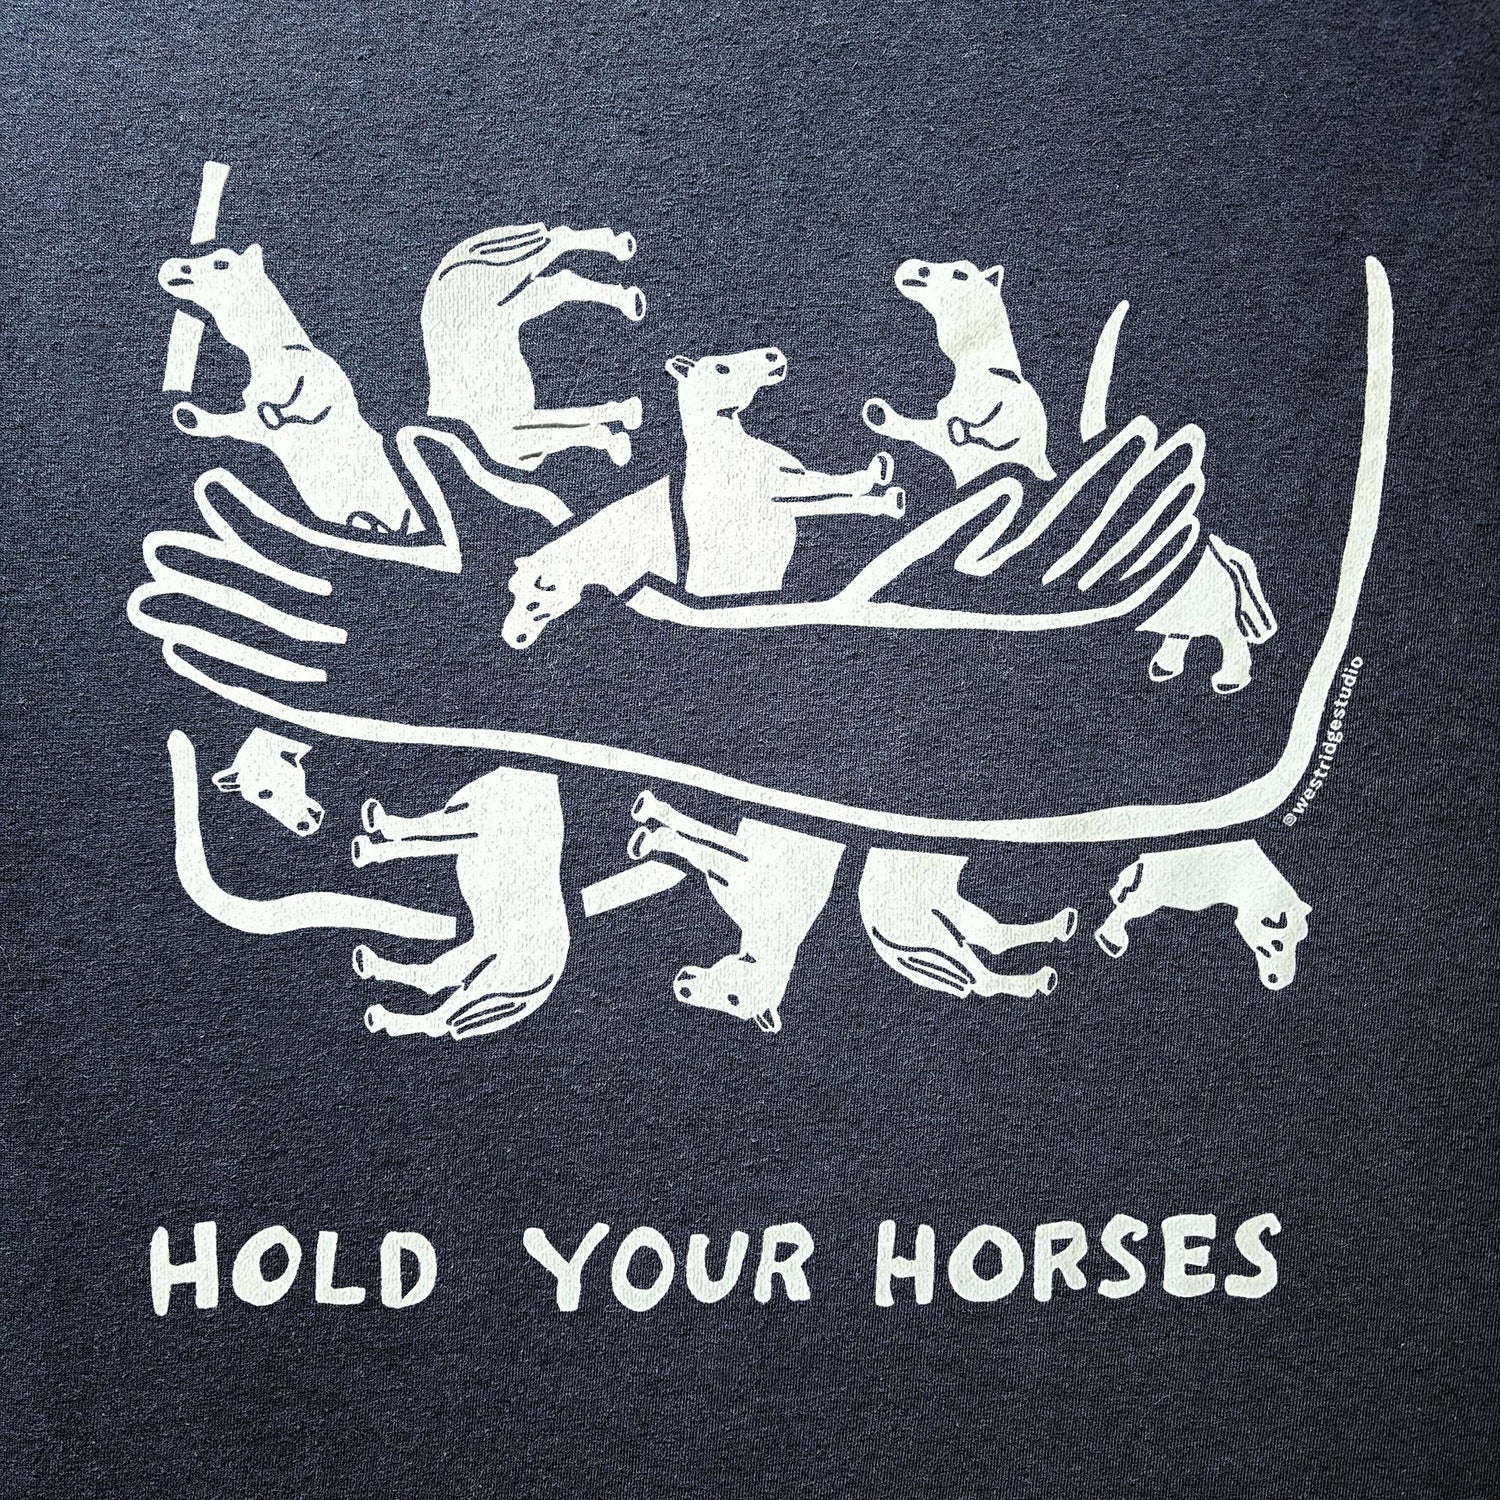 Hold Your Horses eco graphic navy t-shirt for unisex and men's cuts - detail of held horses